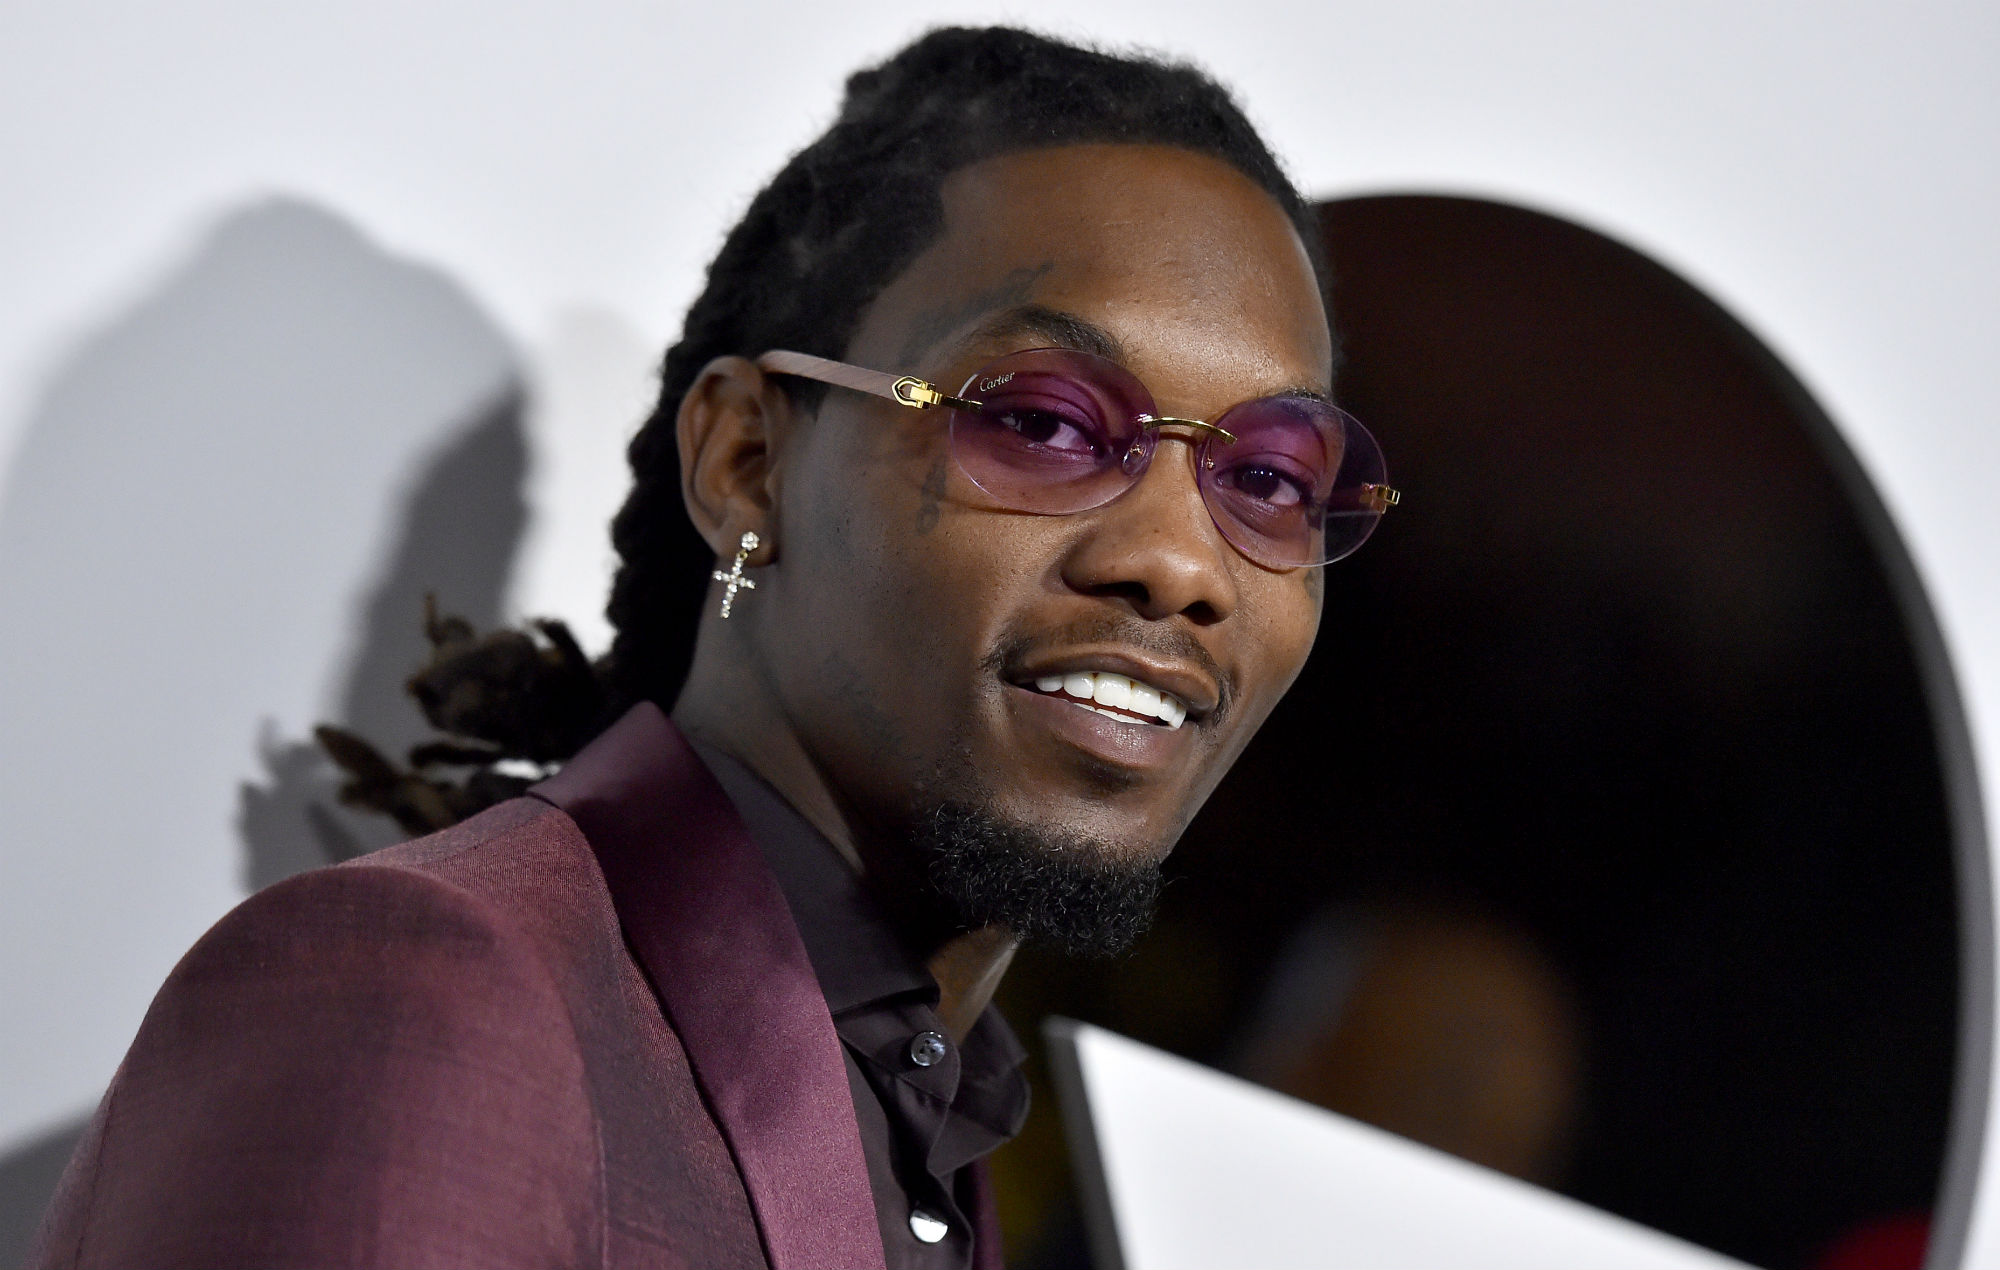 Offset Throws Lavish 32nd Birthday Bash Surrounded By Women Amidst Marital Issues